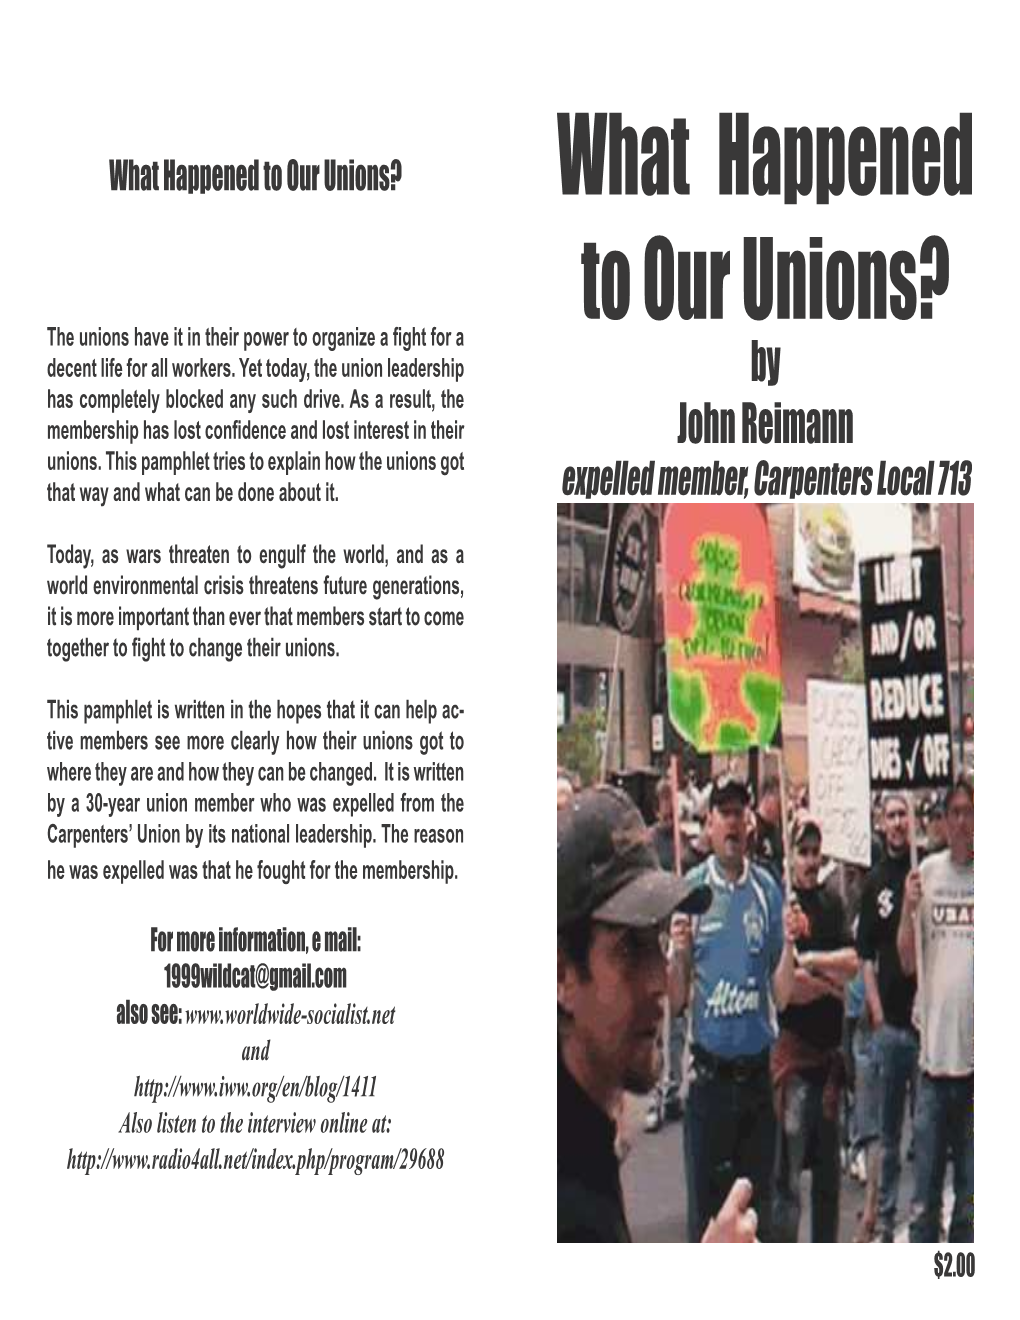 Laid out Pamphlet 2009 Edition